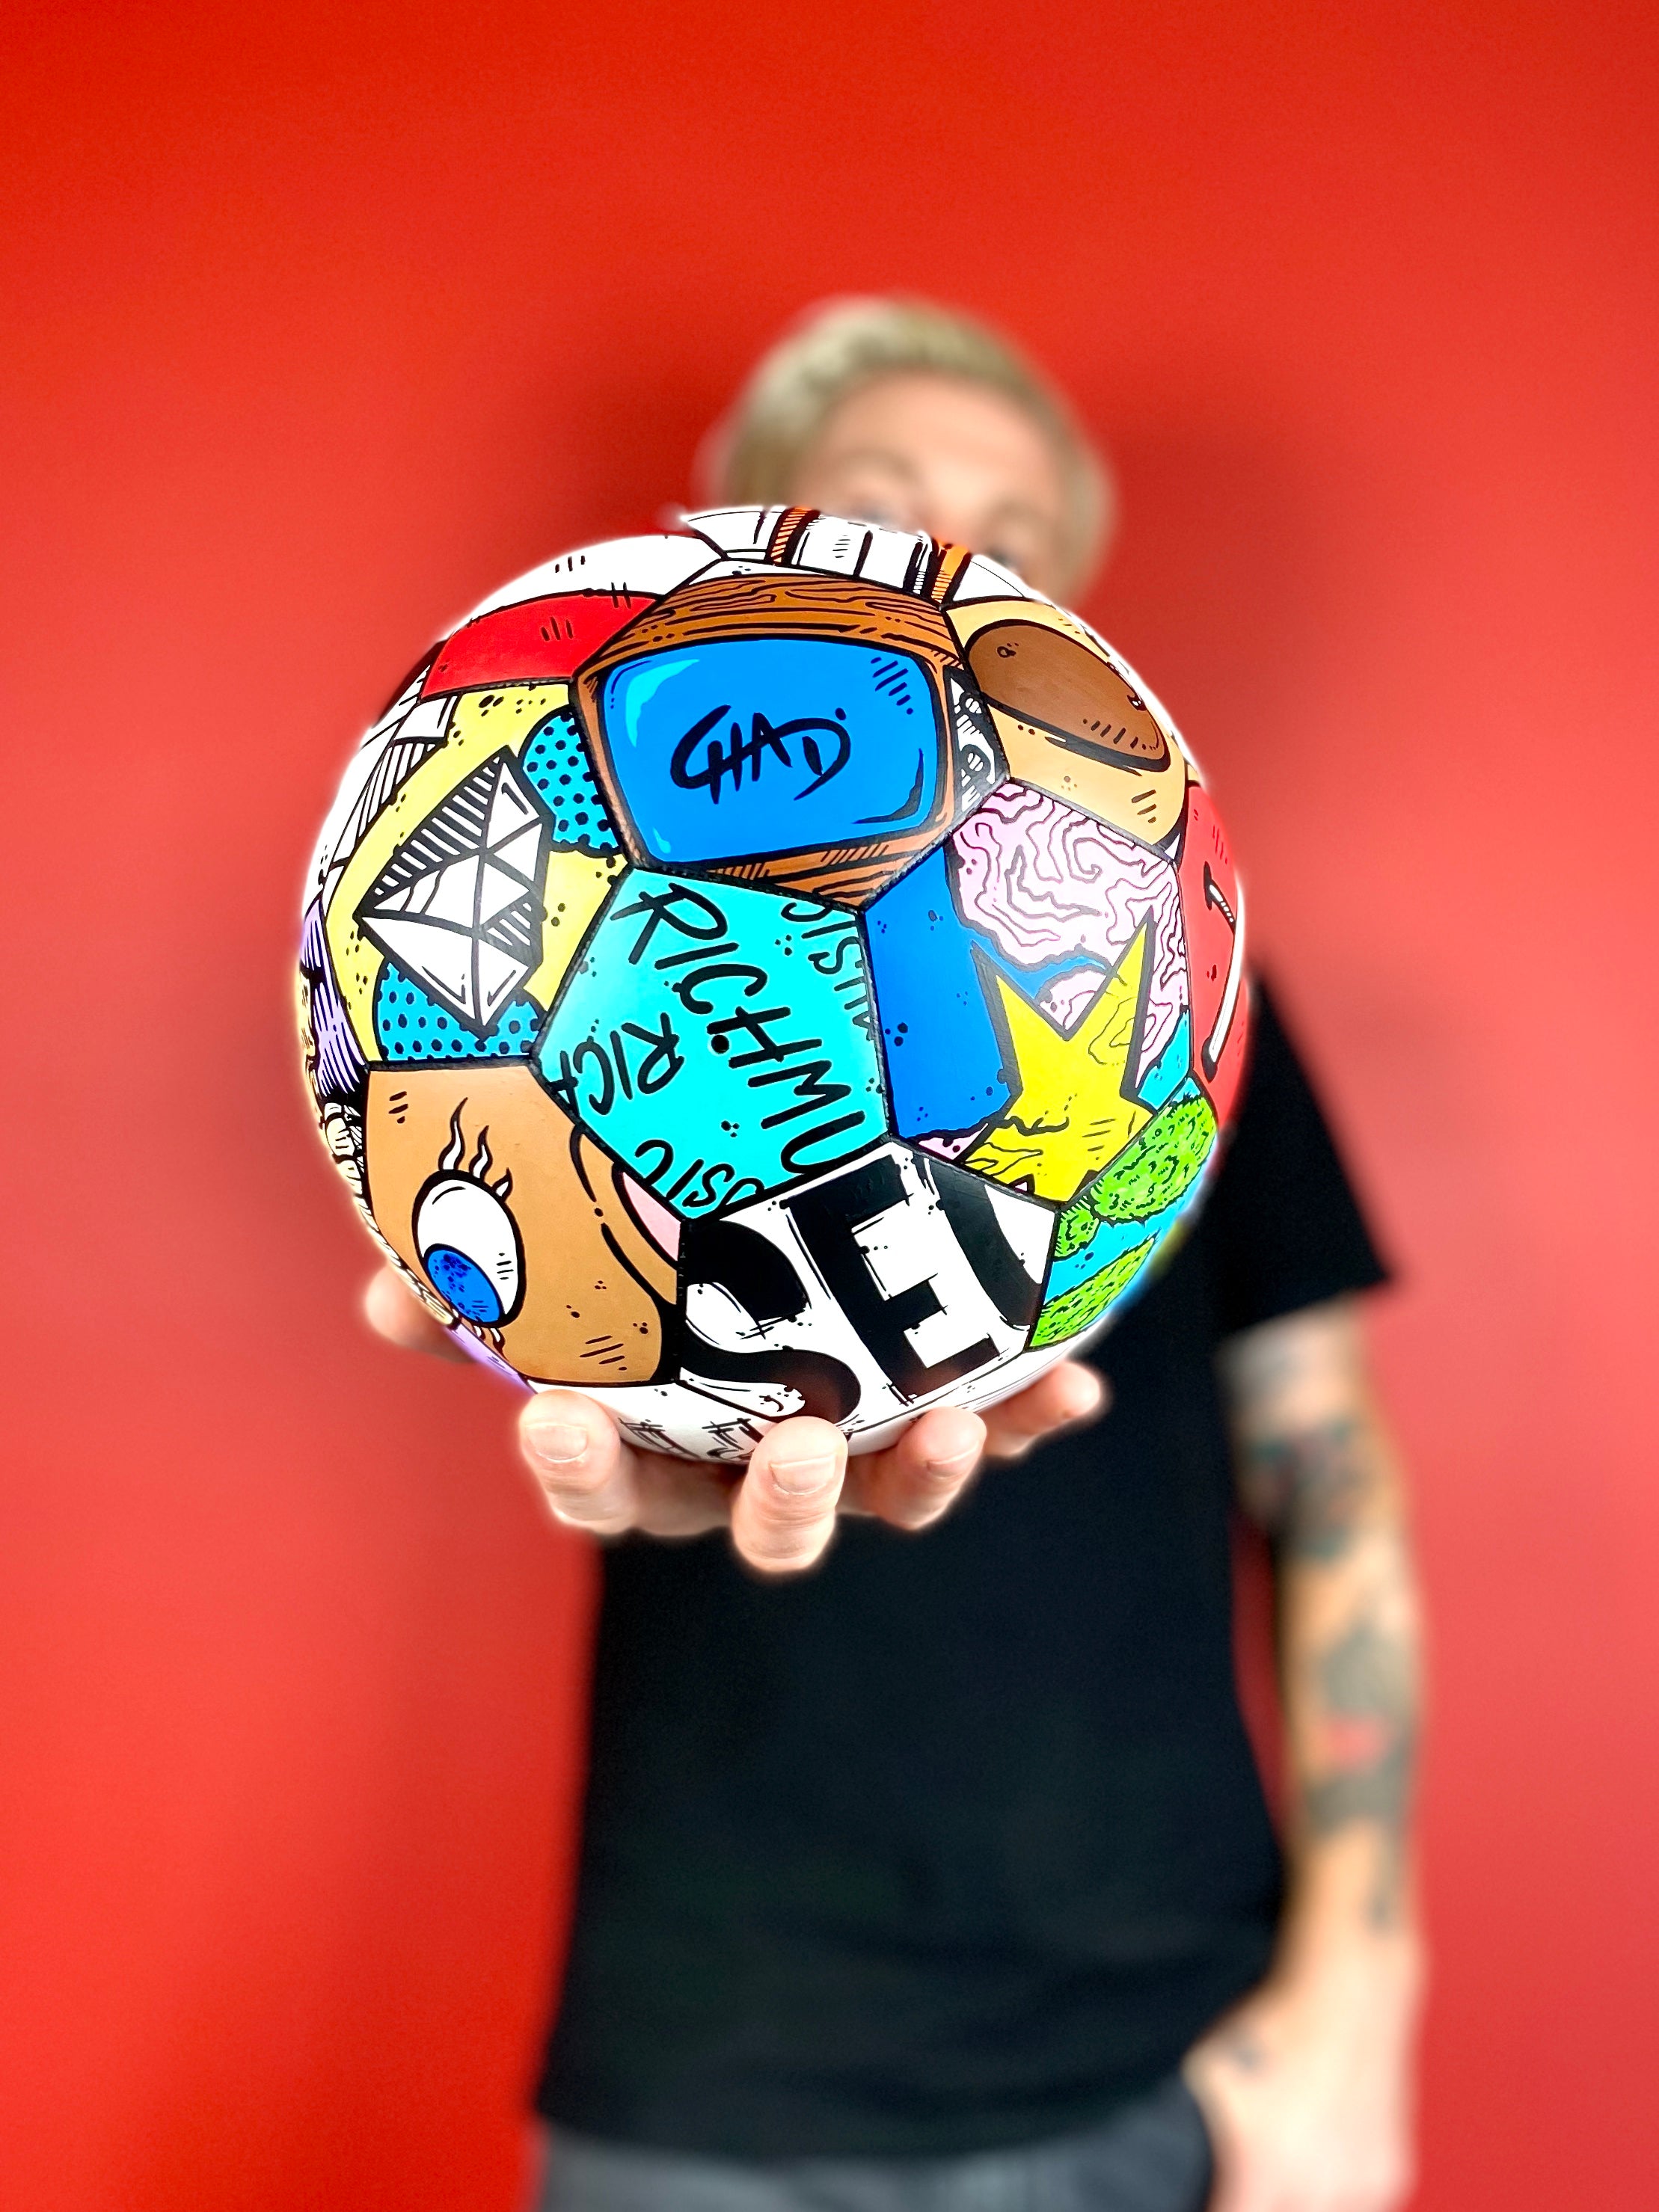 Sech 1 of 1 - Hand painted Soccerball - Football - Futball